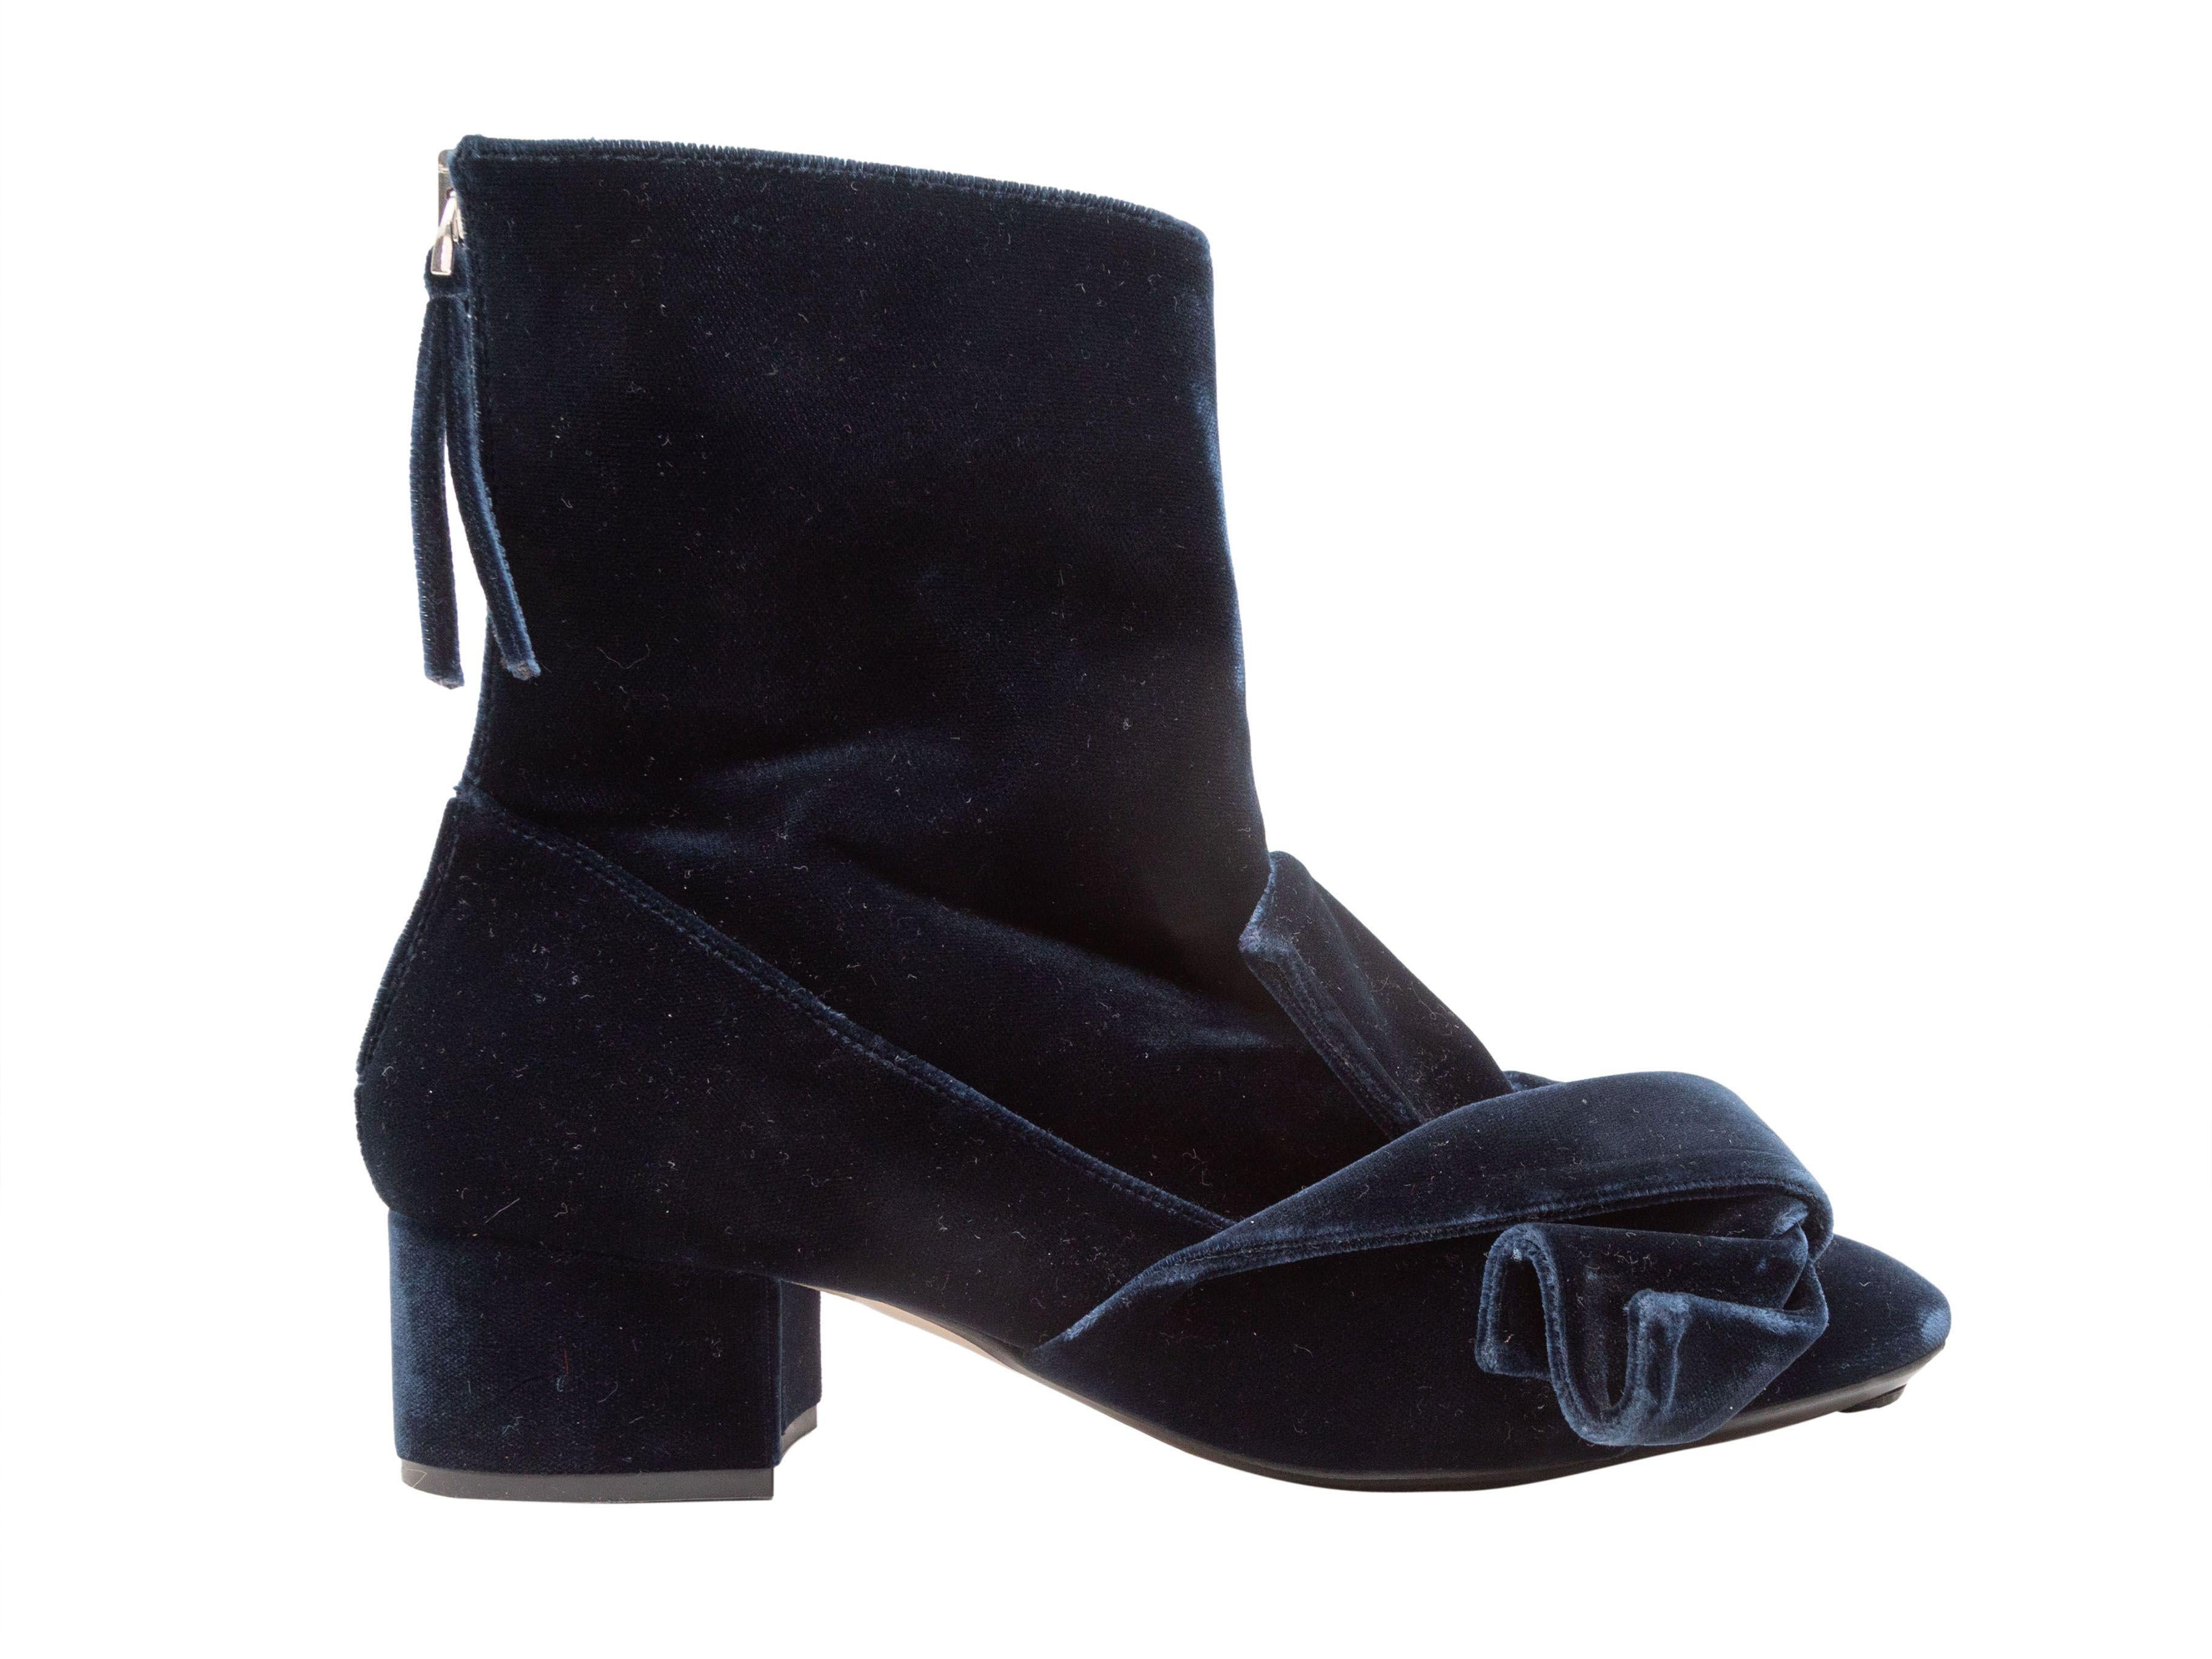 N21 Navy Velvet Ruffle-Accented Ankle Boots 1